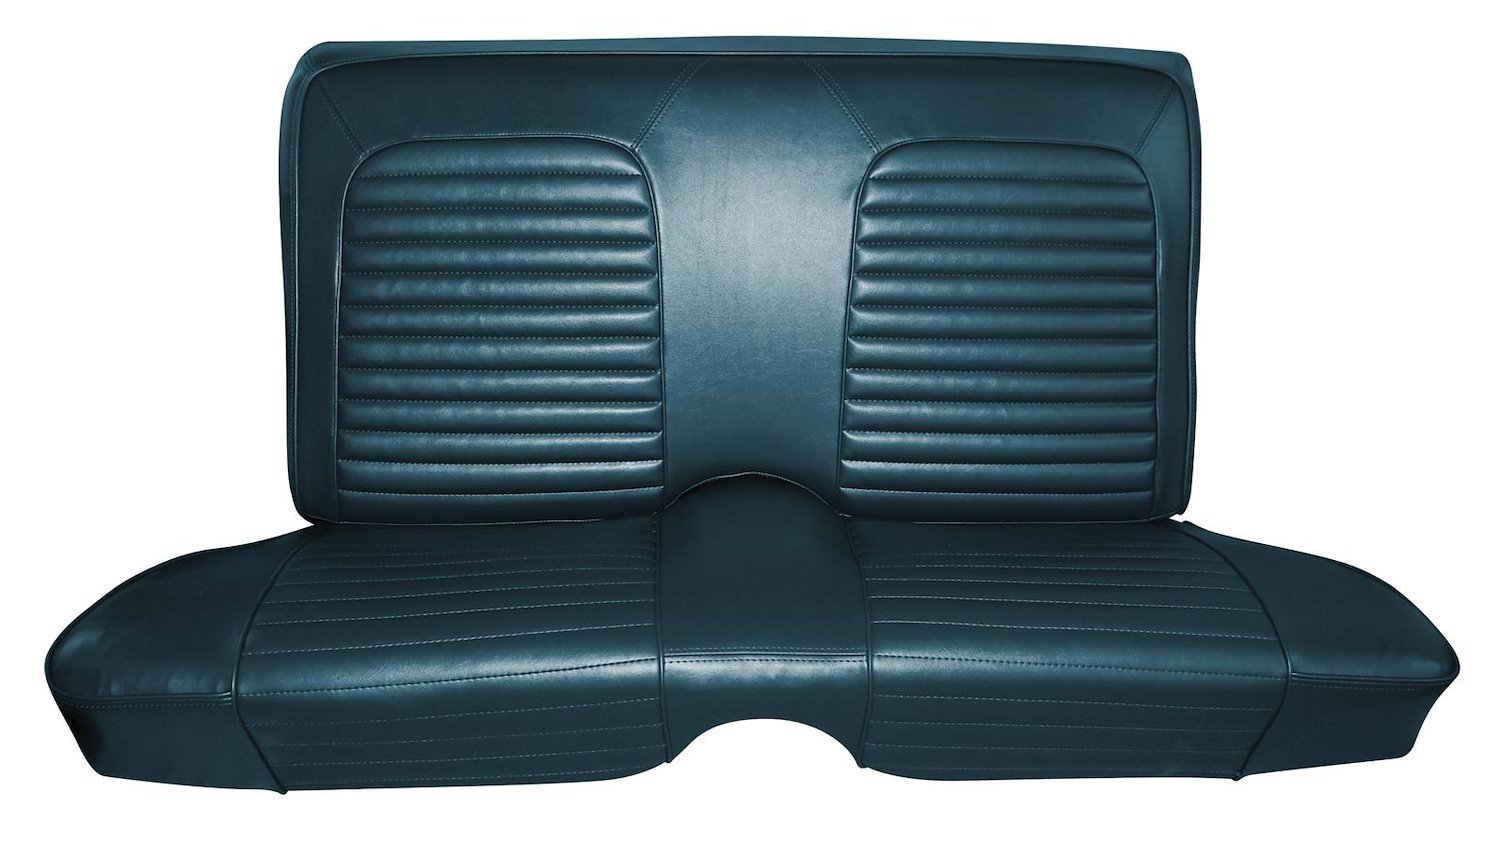 1966 Ford Fairlane 500XL, GT and GTA 2-Door Hardtop Interior Rear Bench Seat Upholstery Set